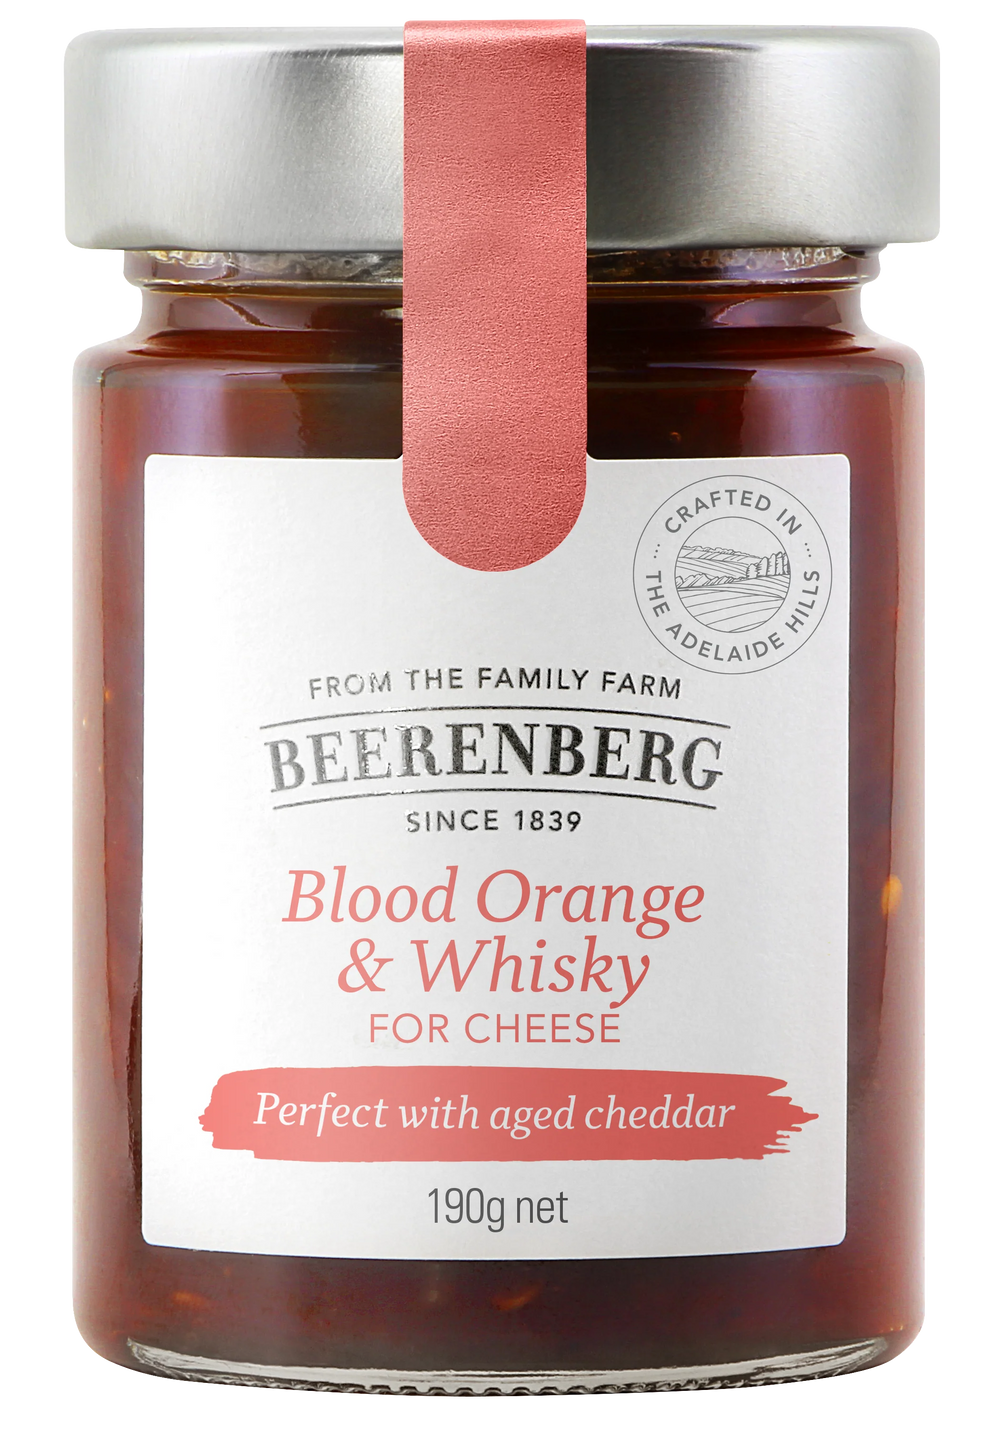 Beerenberg Blood Orange & Whisky for Cheese 190g x 1 unit